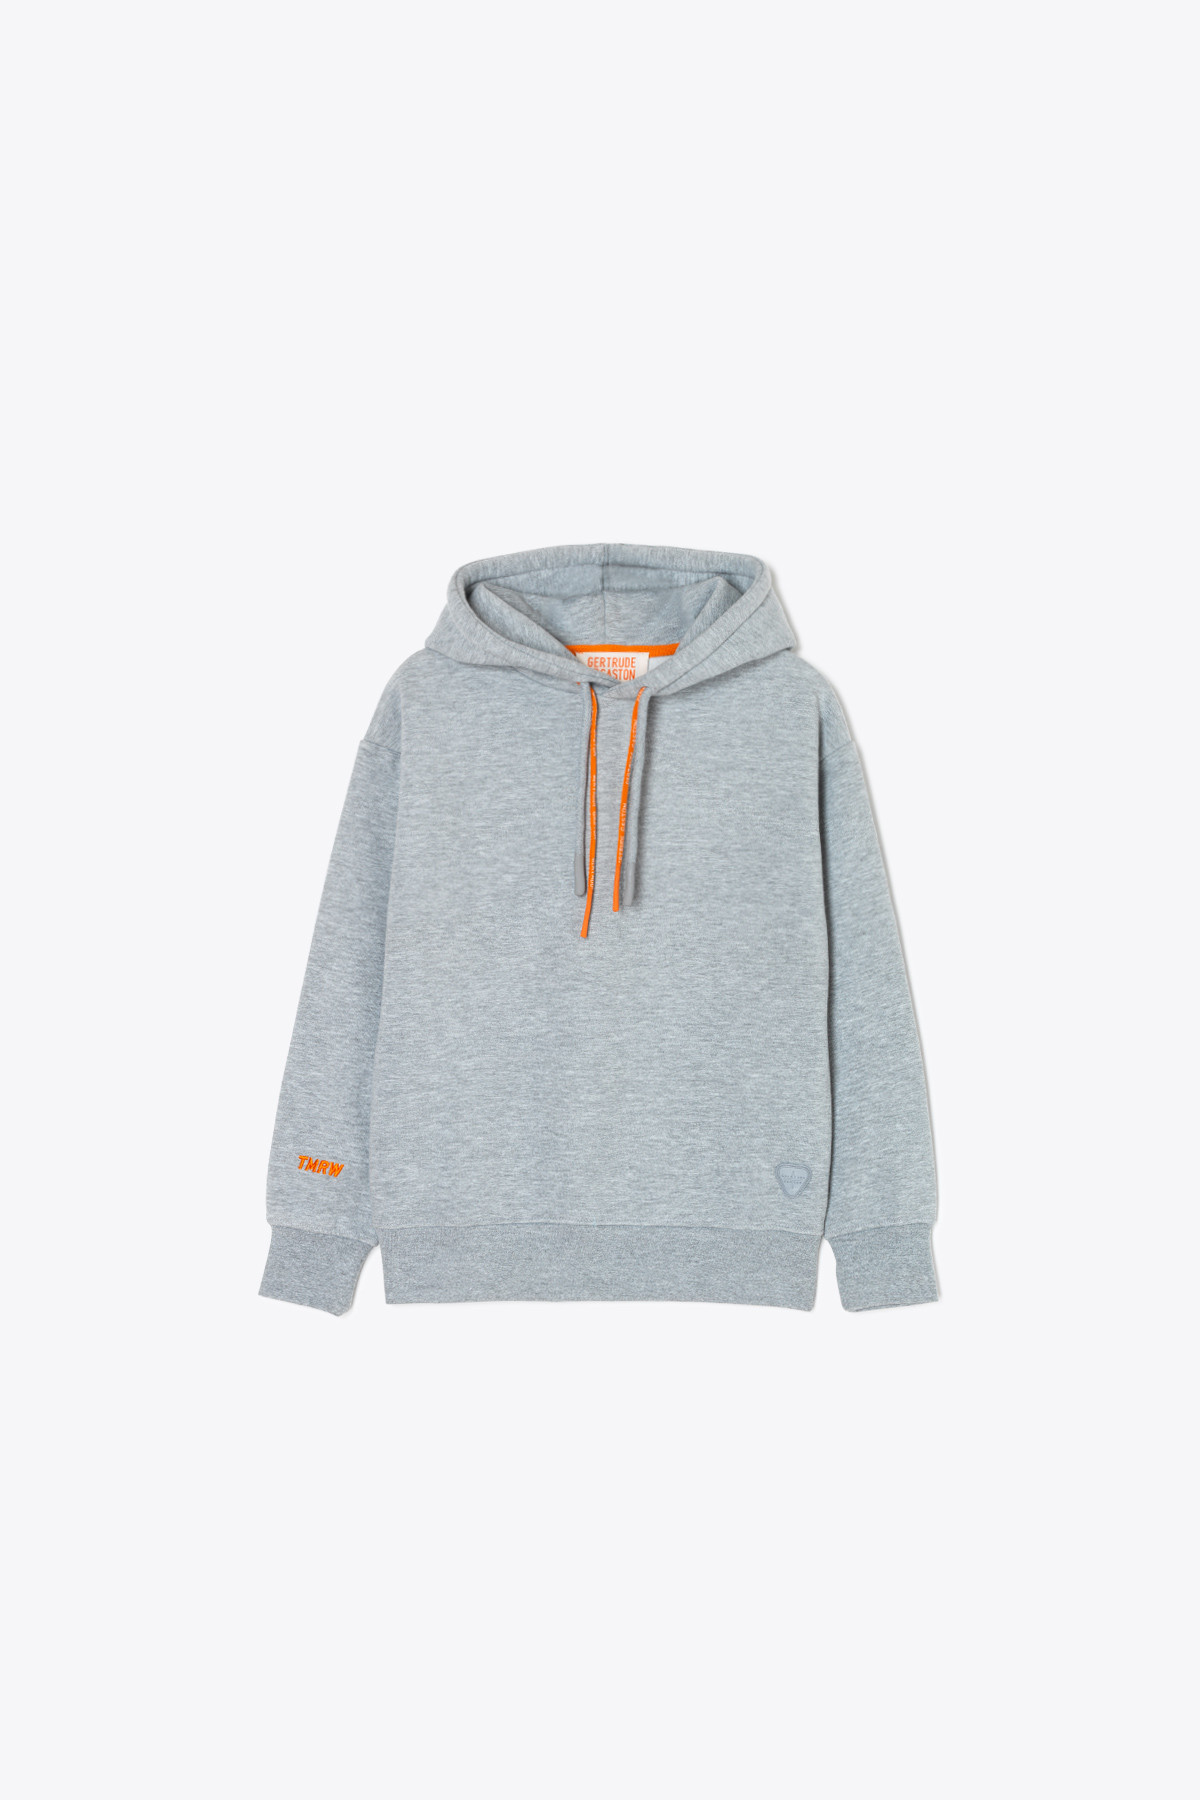 Little Charly Hoodie chiné grey